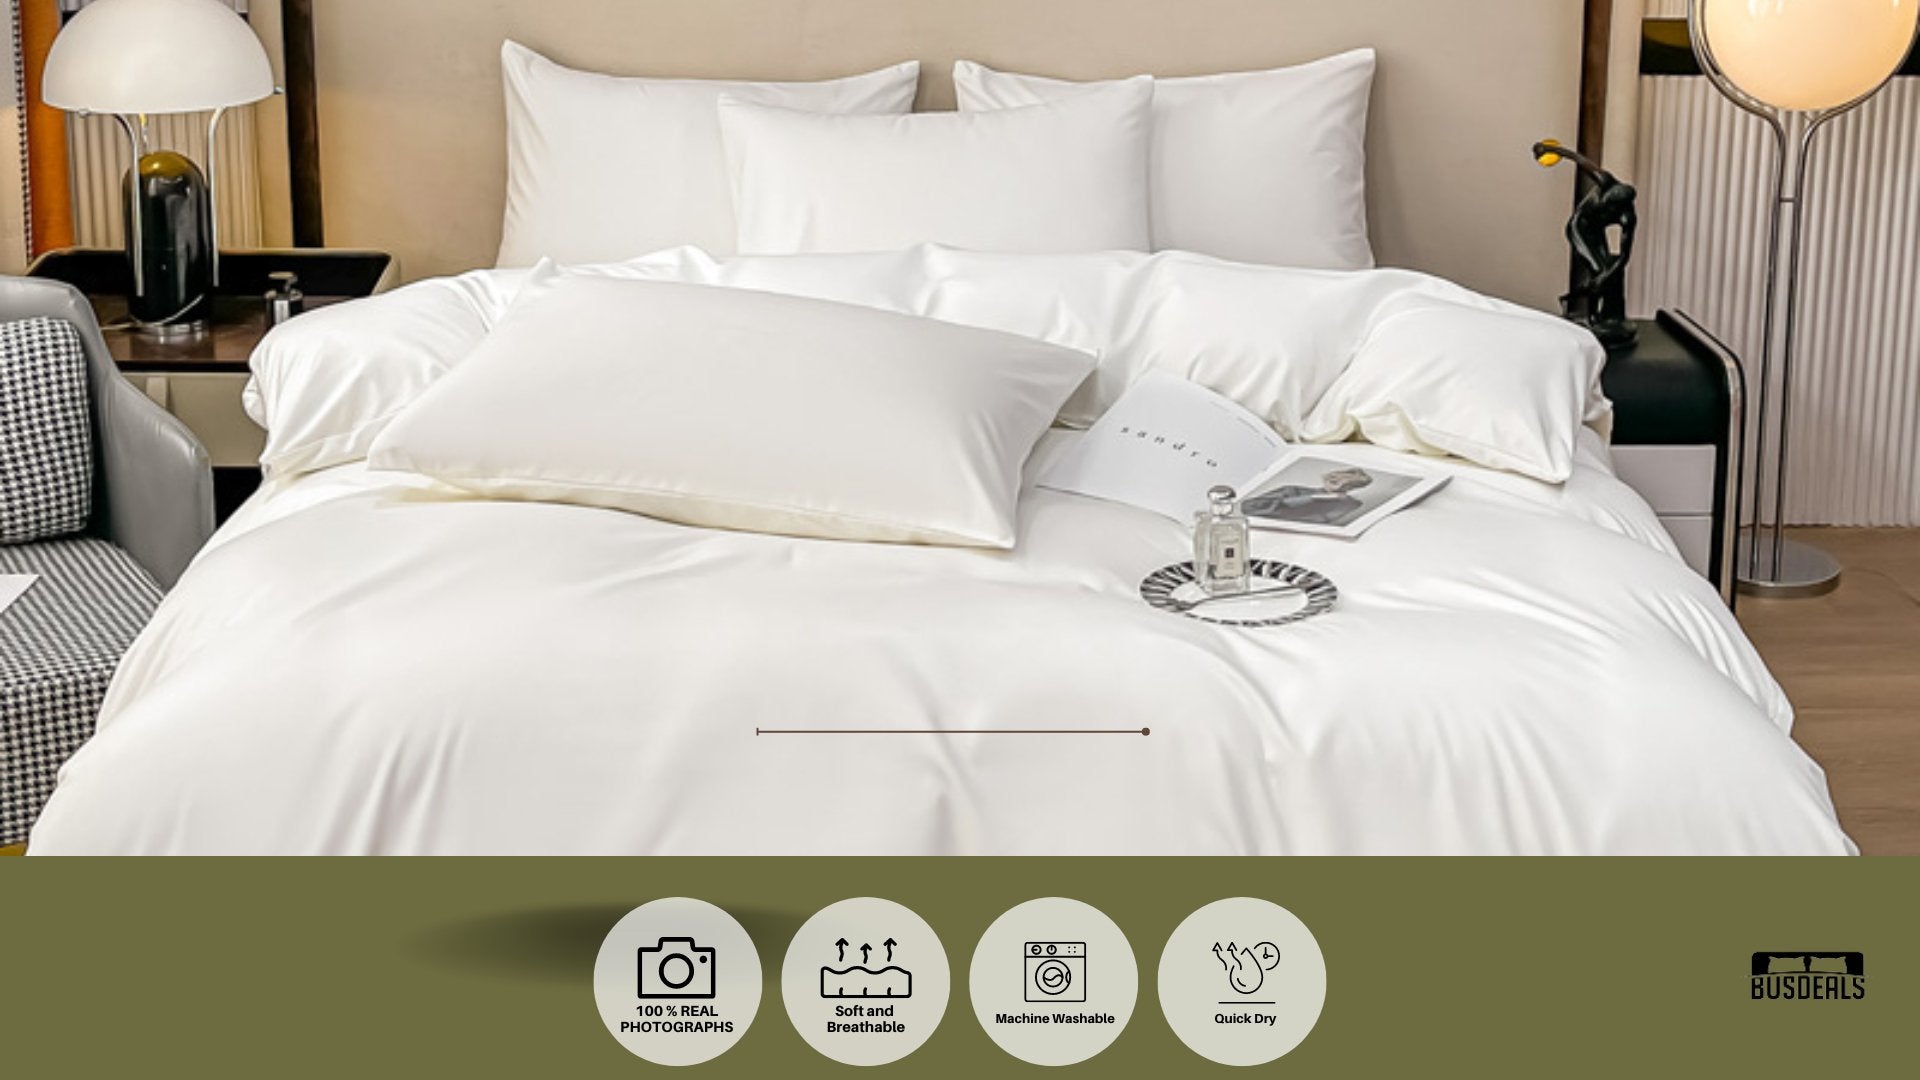 Discover the Elegance: King Size Bedding Set from Busdeals Today - BusDeals